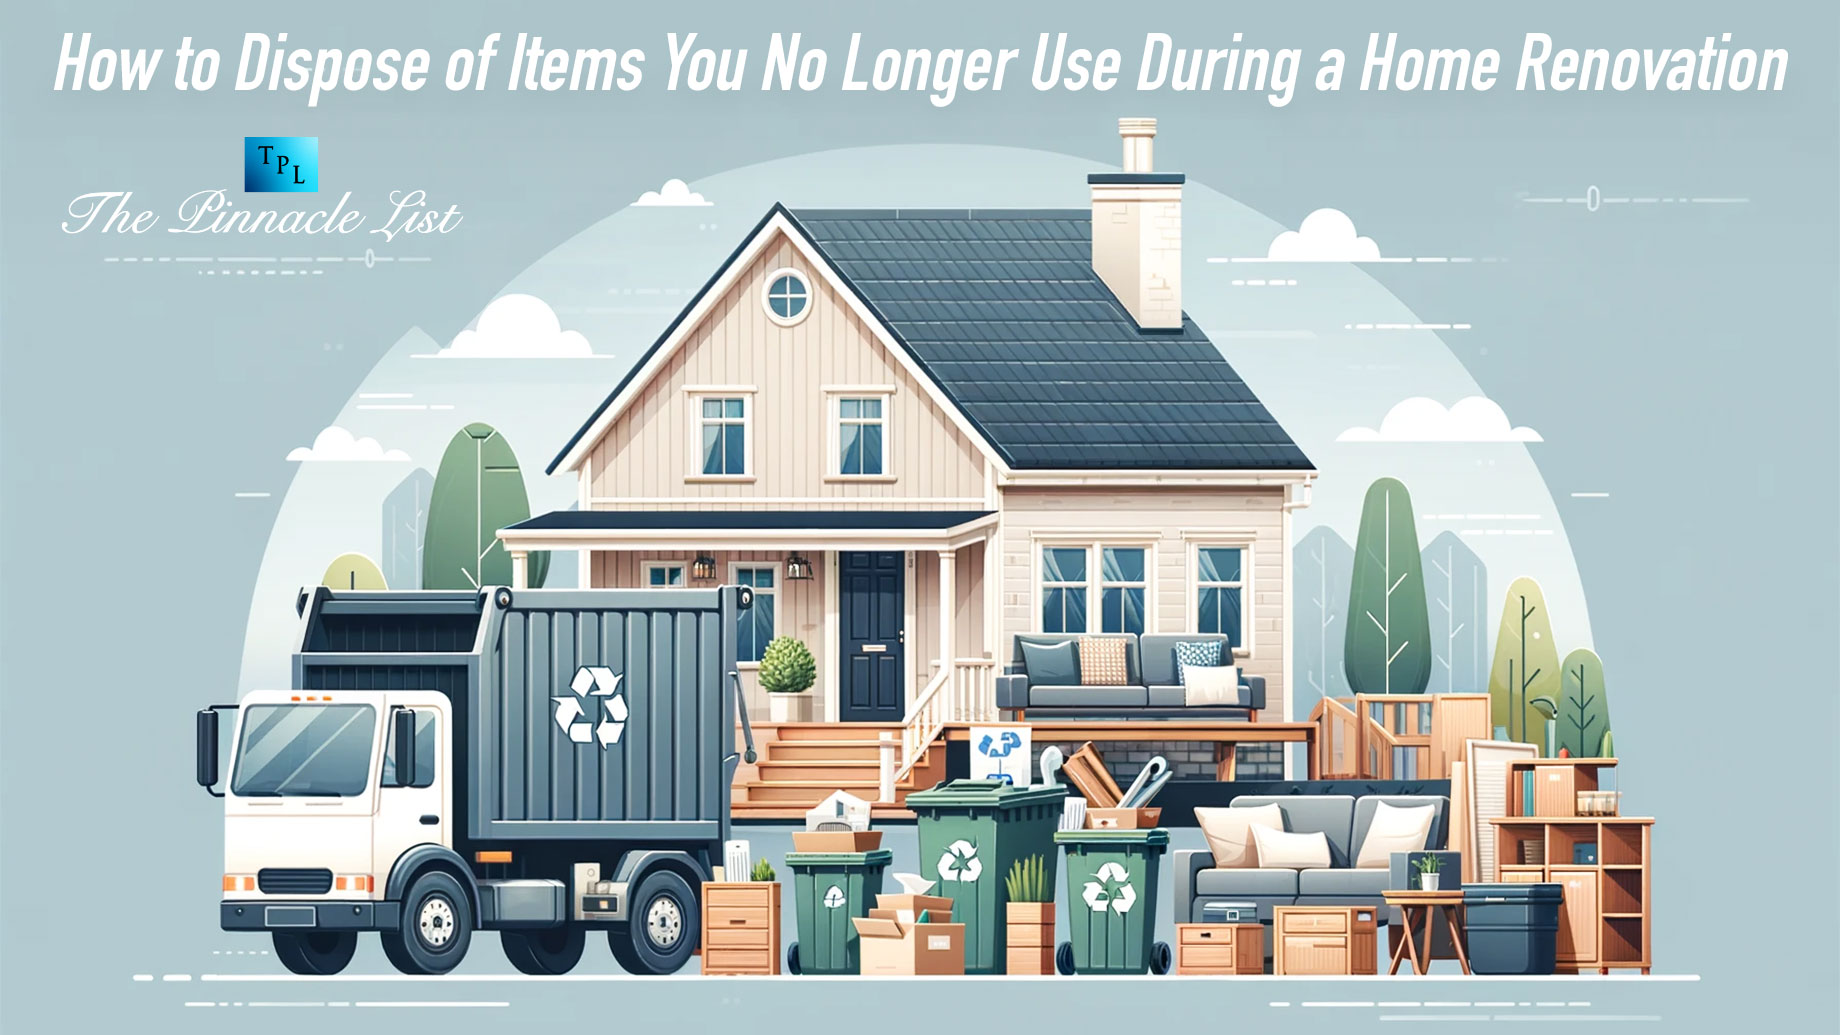 How to Dispose of Items You No Longer Use During a Home Renovation